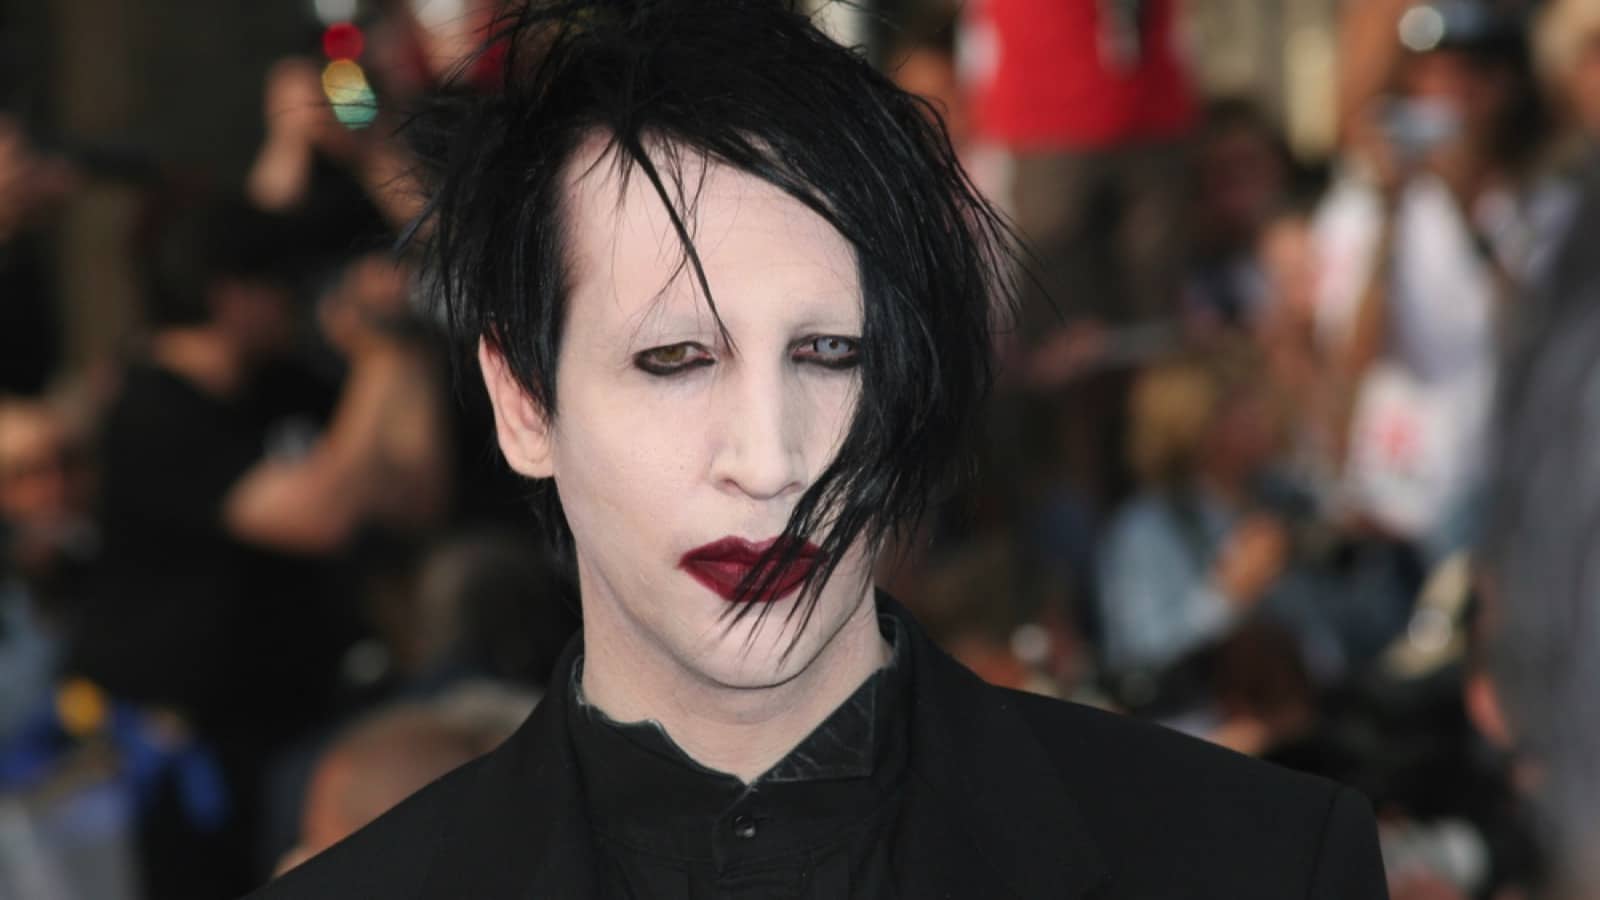 CANNES, FRANCE - MAY 20: Musician Marilyn Manson attends the 'Selon Charlie' premiere at the Palais des Festivals during the 59th International Cannes Film Festival May 20, 2006 in Cannes, France.